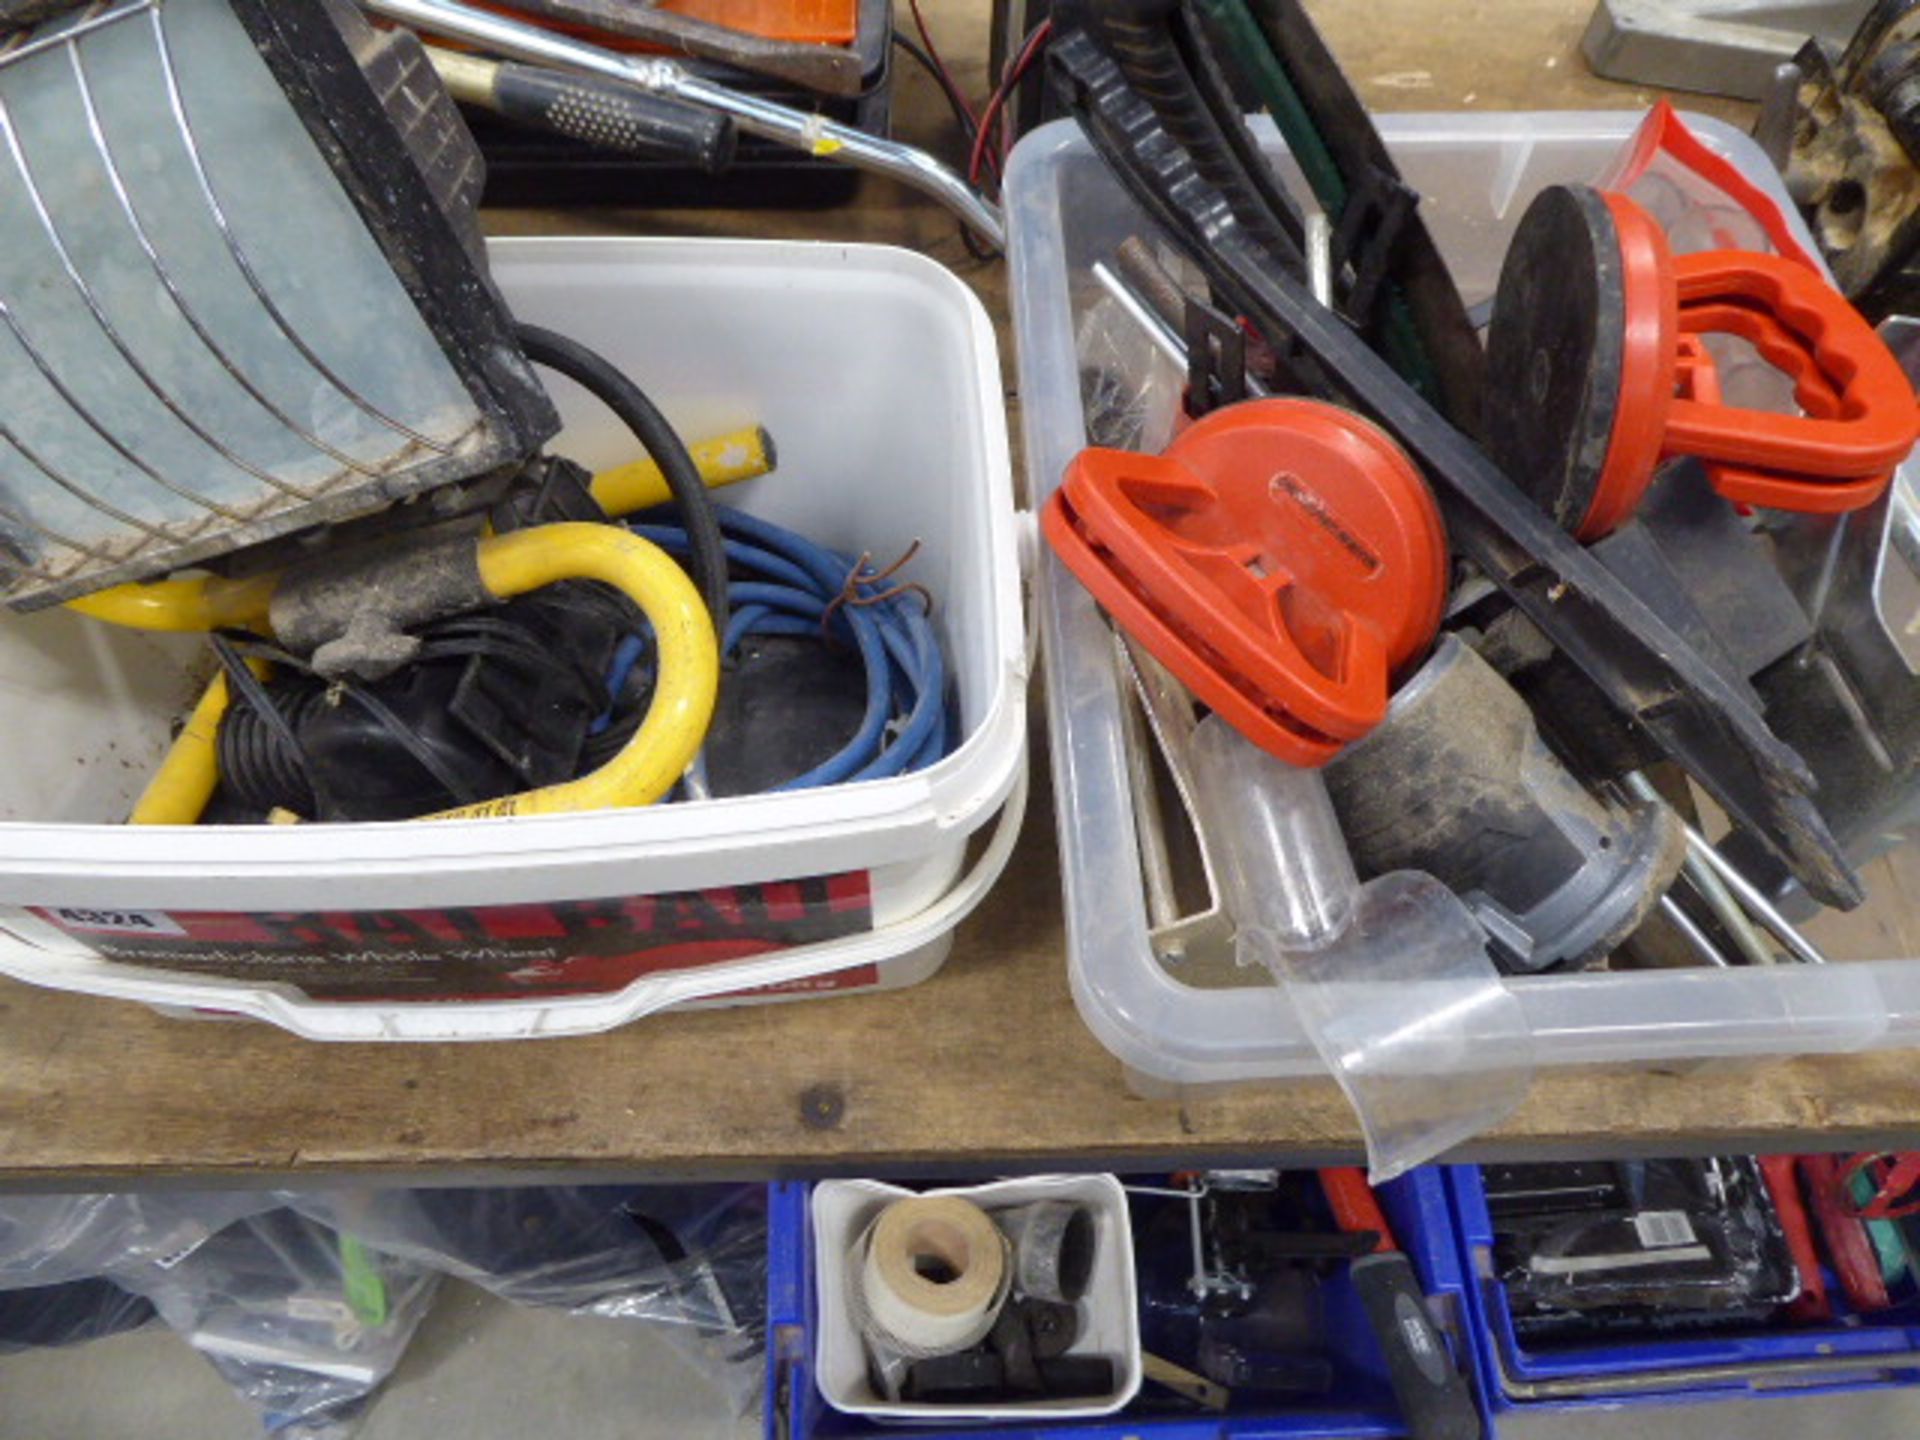 Two plastic boxes containing lead light, mini compressor, pullers and various other tools